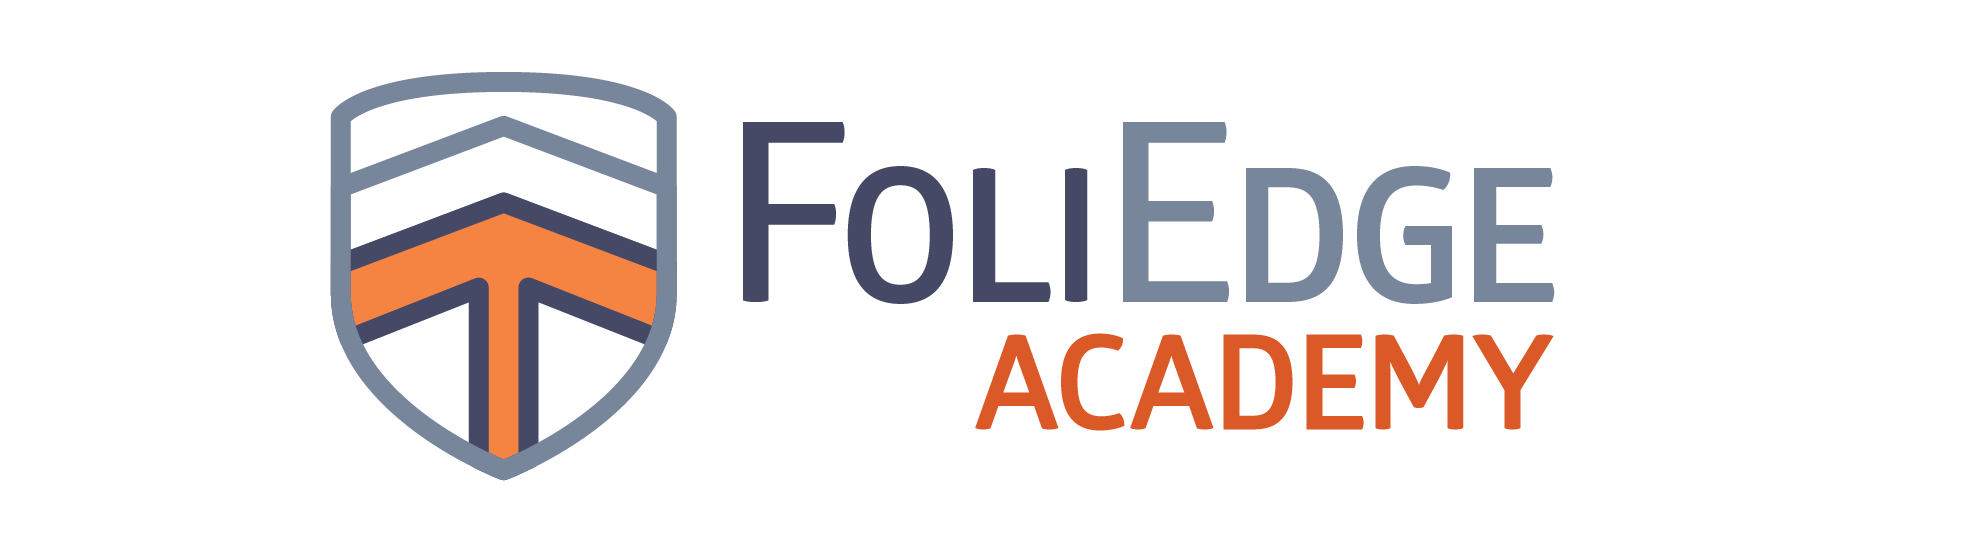 Aleafia Health’s FoliEdge Academy Launching Cannabis Education Courses at a Major Post-Secondary Institution